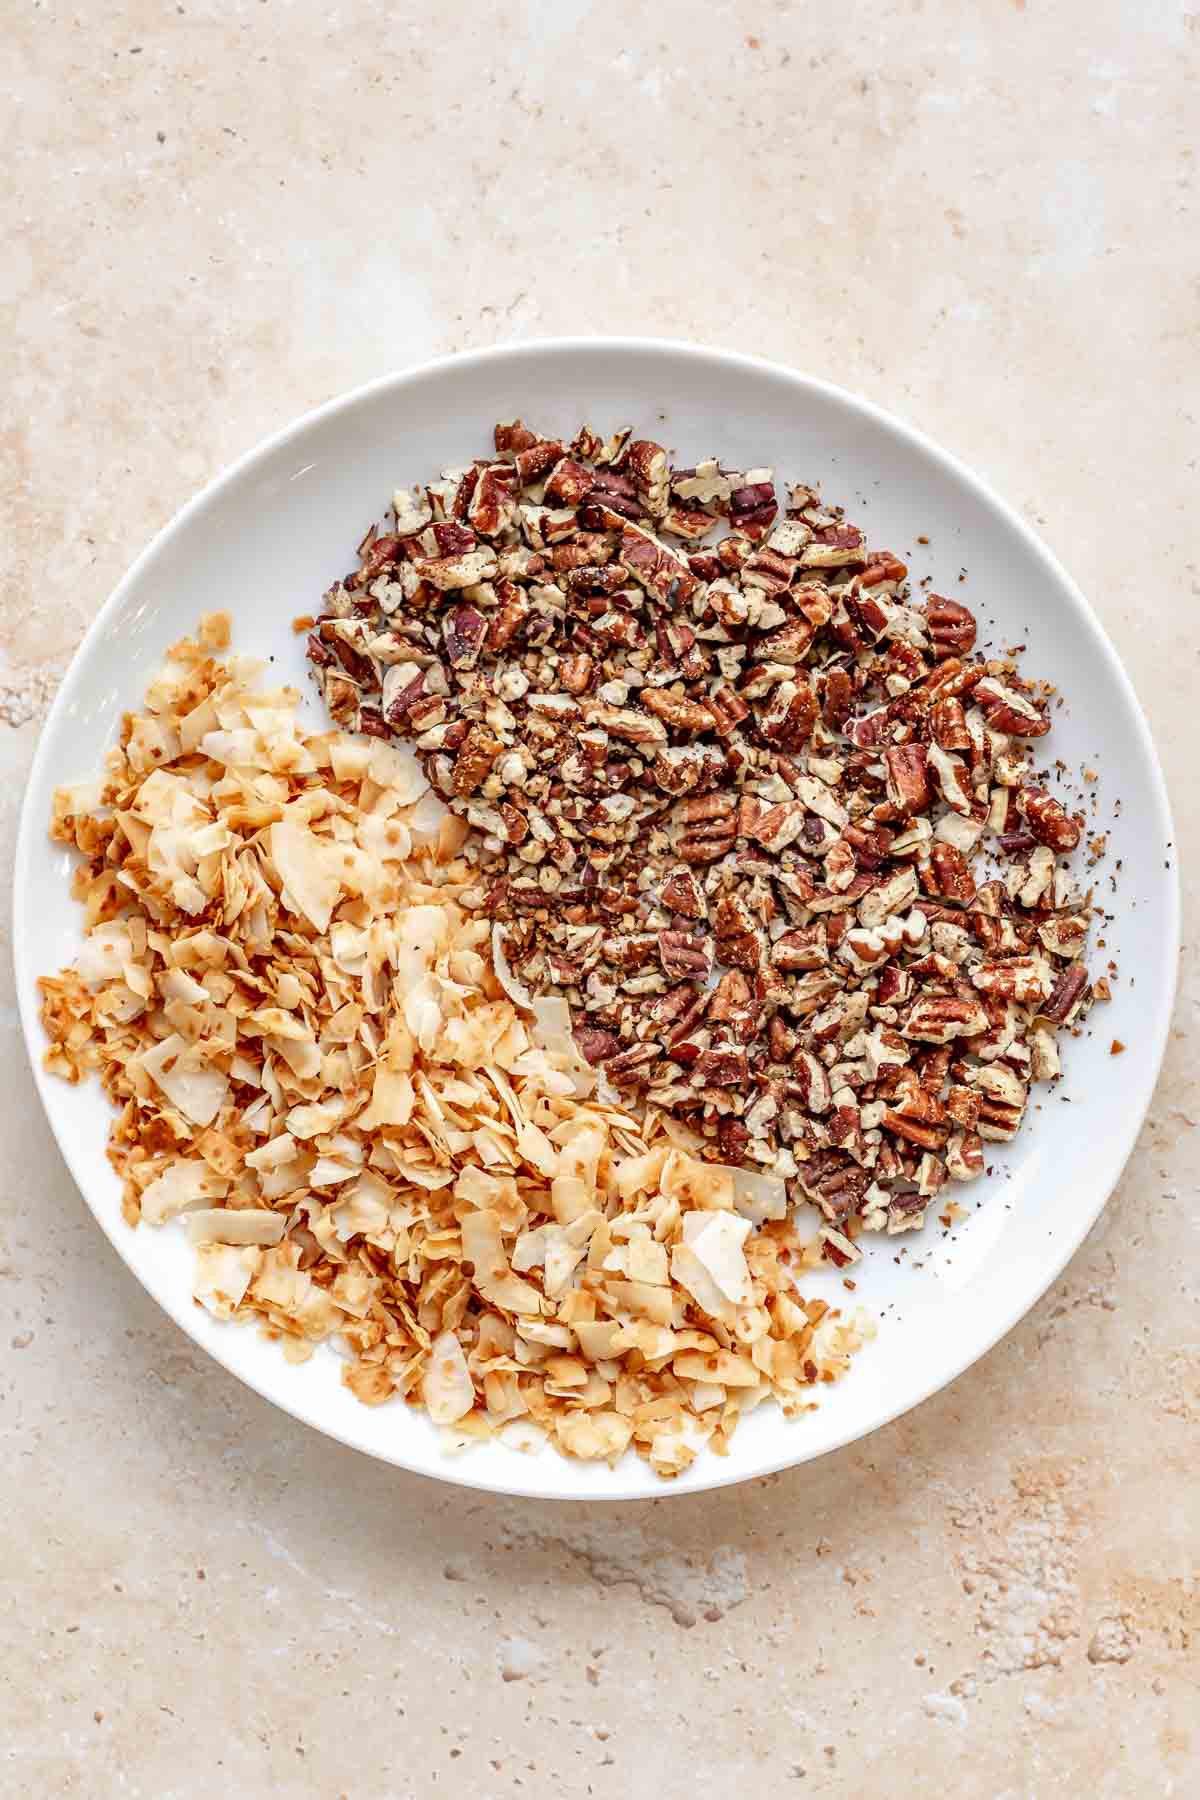 Toasted pecans and coconut in a bowl.